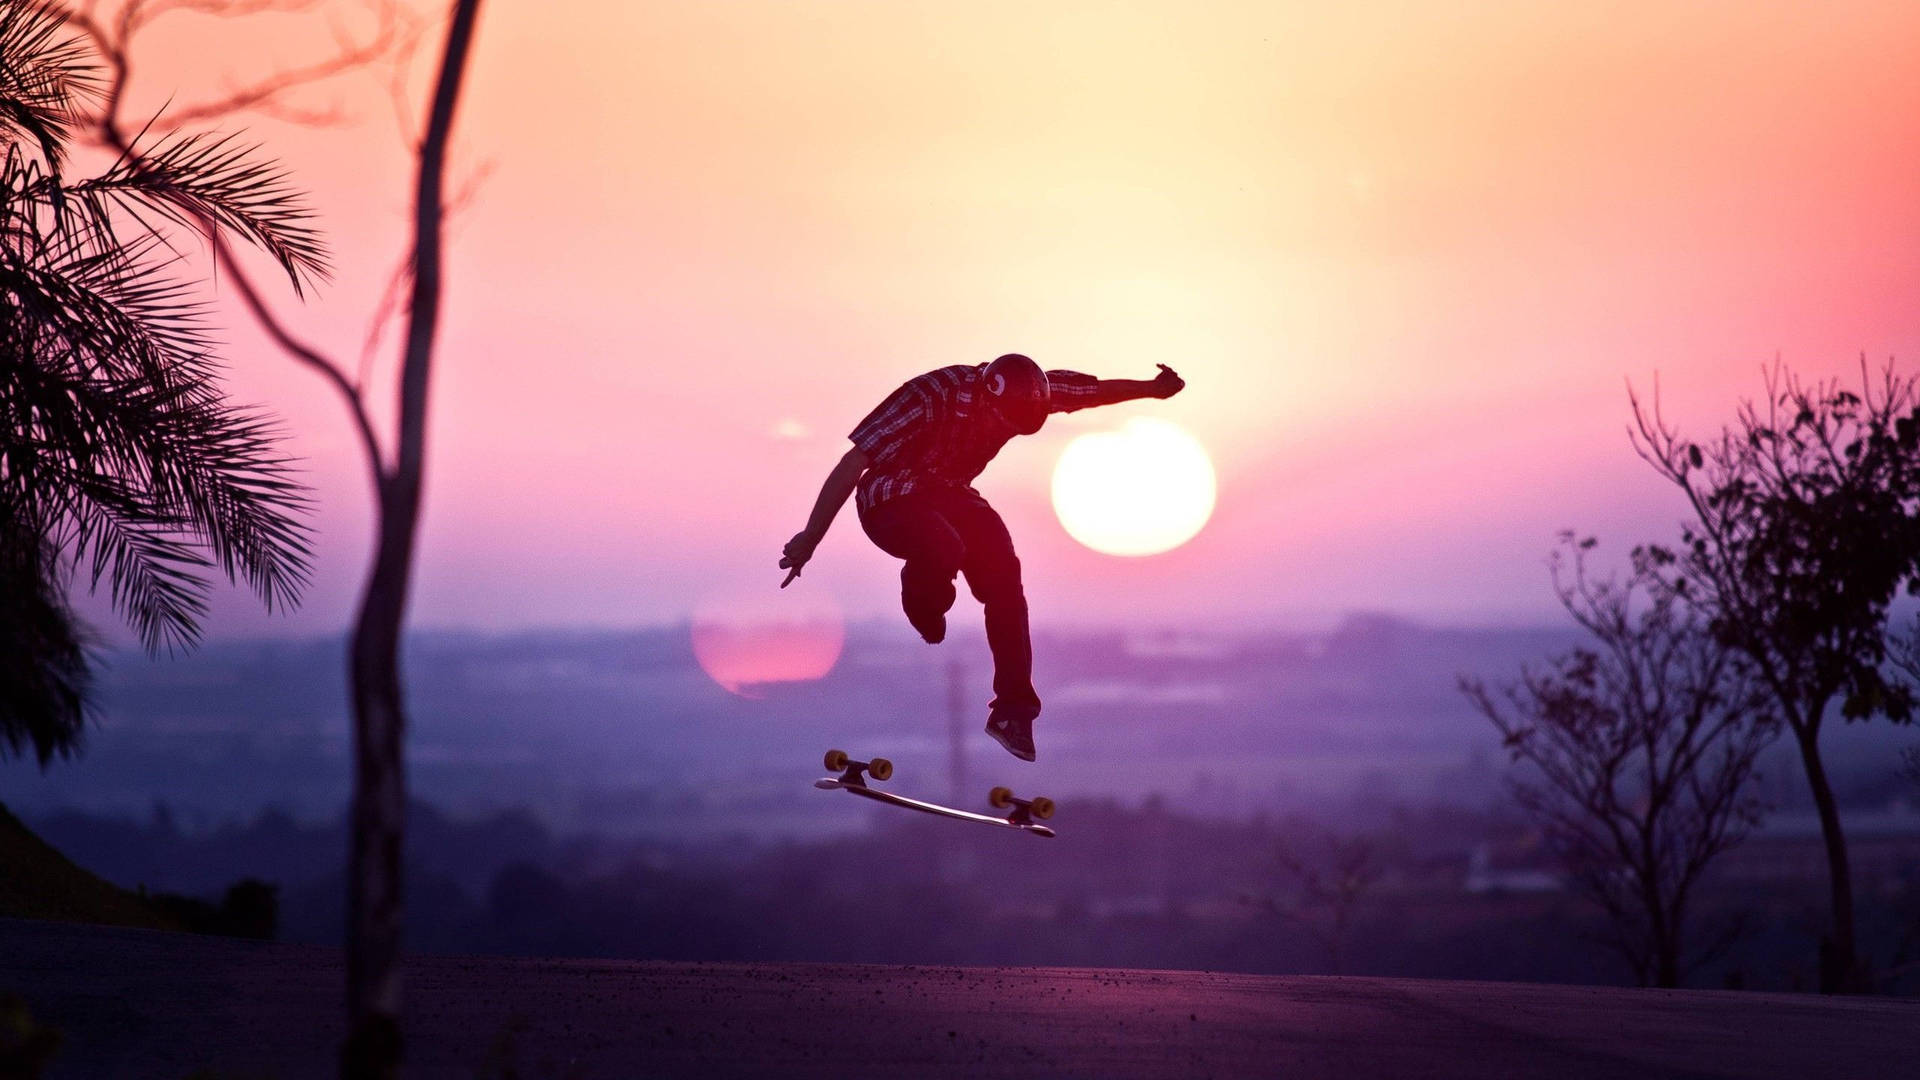 Skateboard In The Sunset Background